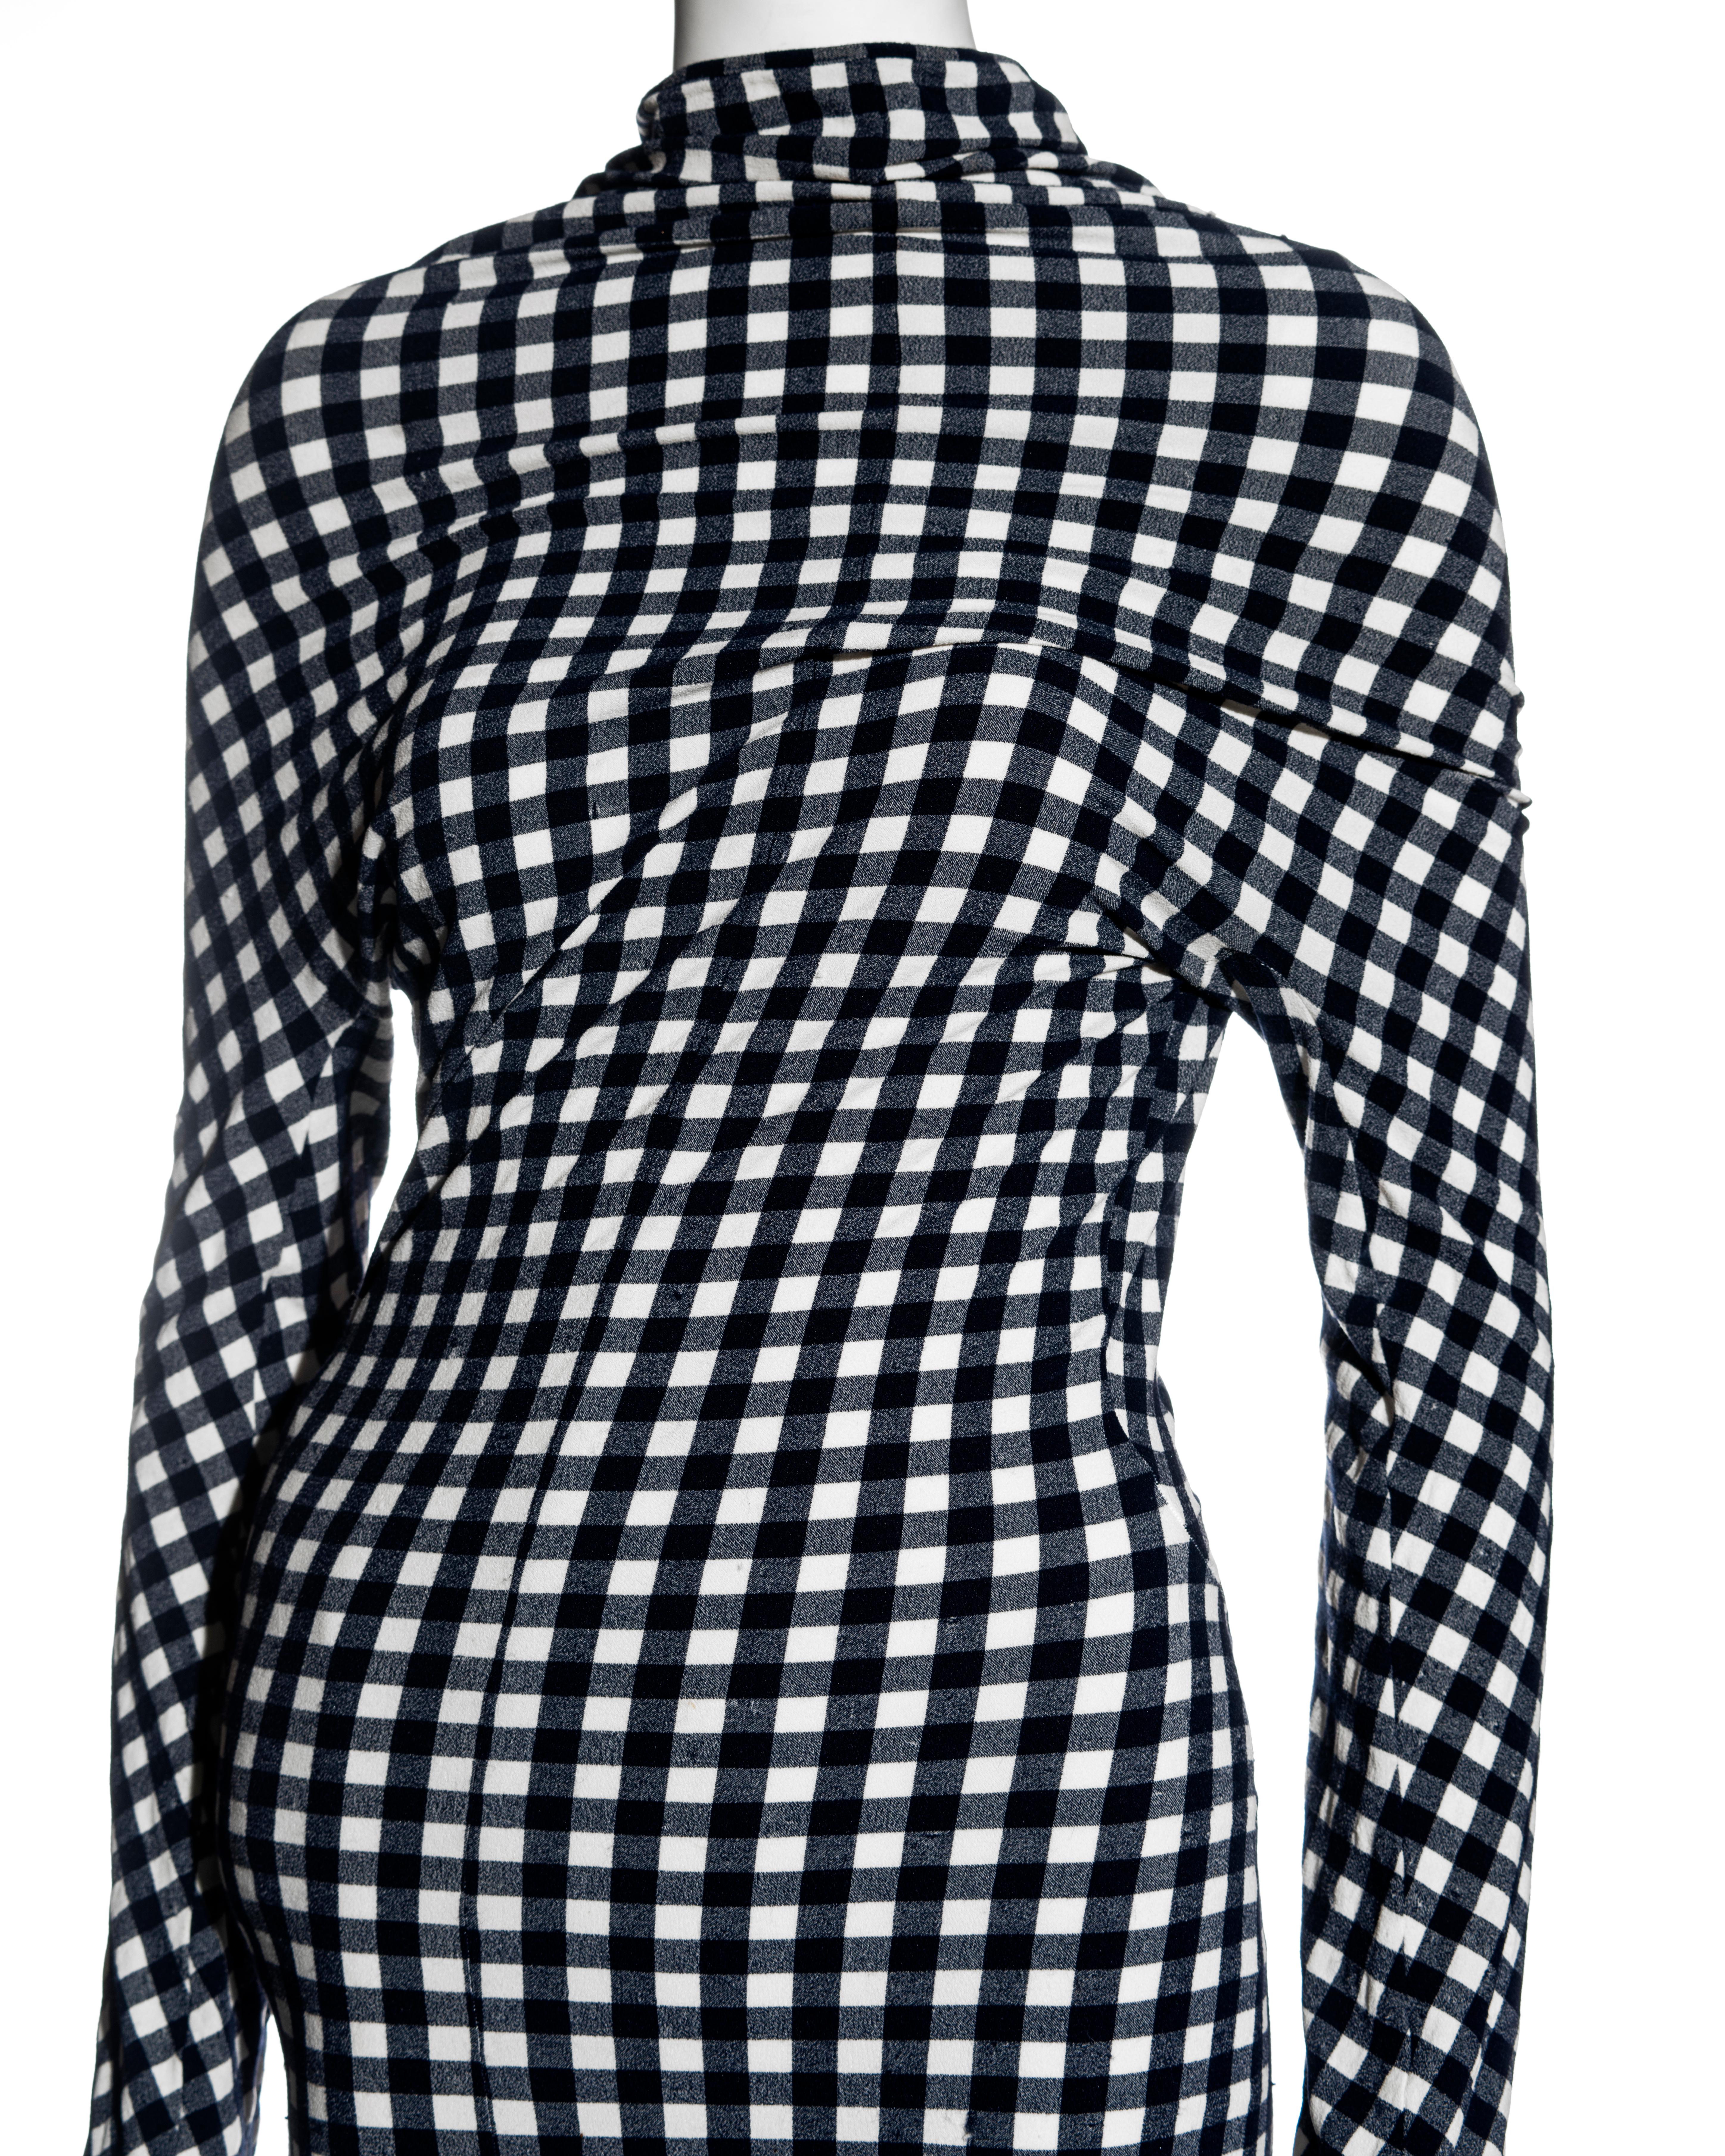 Black Comme des Garcons navy and white gingham 2-piece dress with pillows, ss 1997